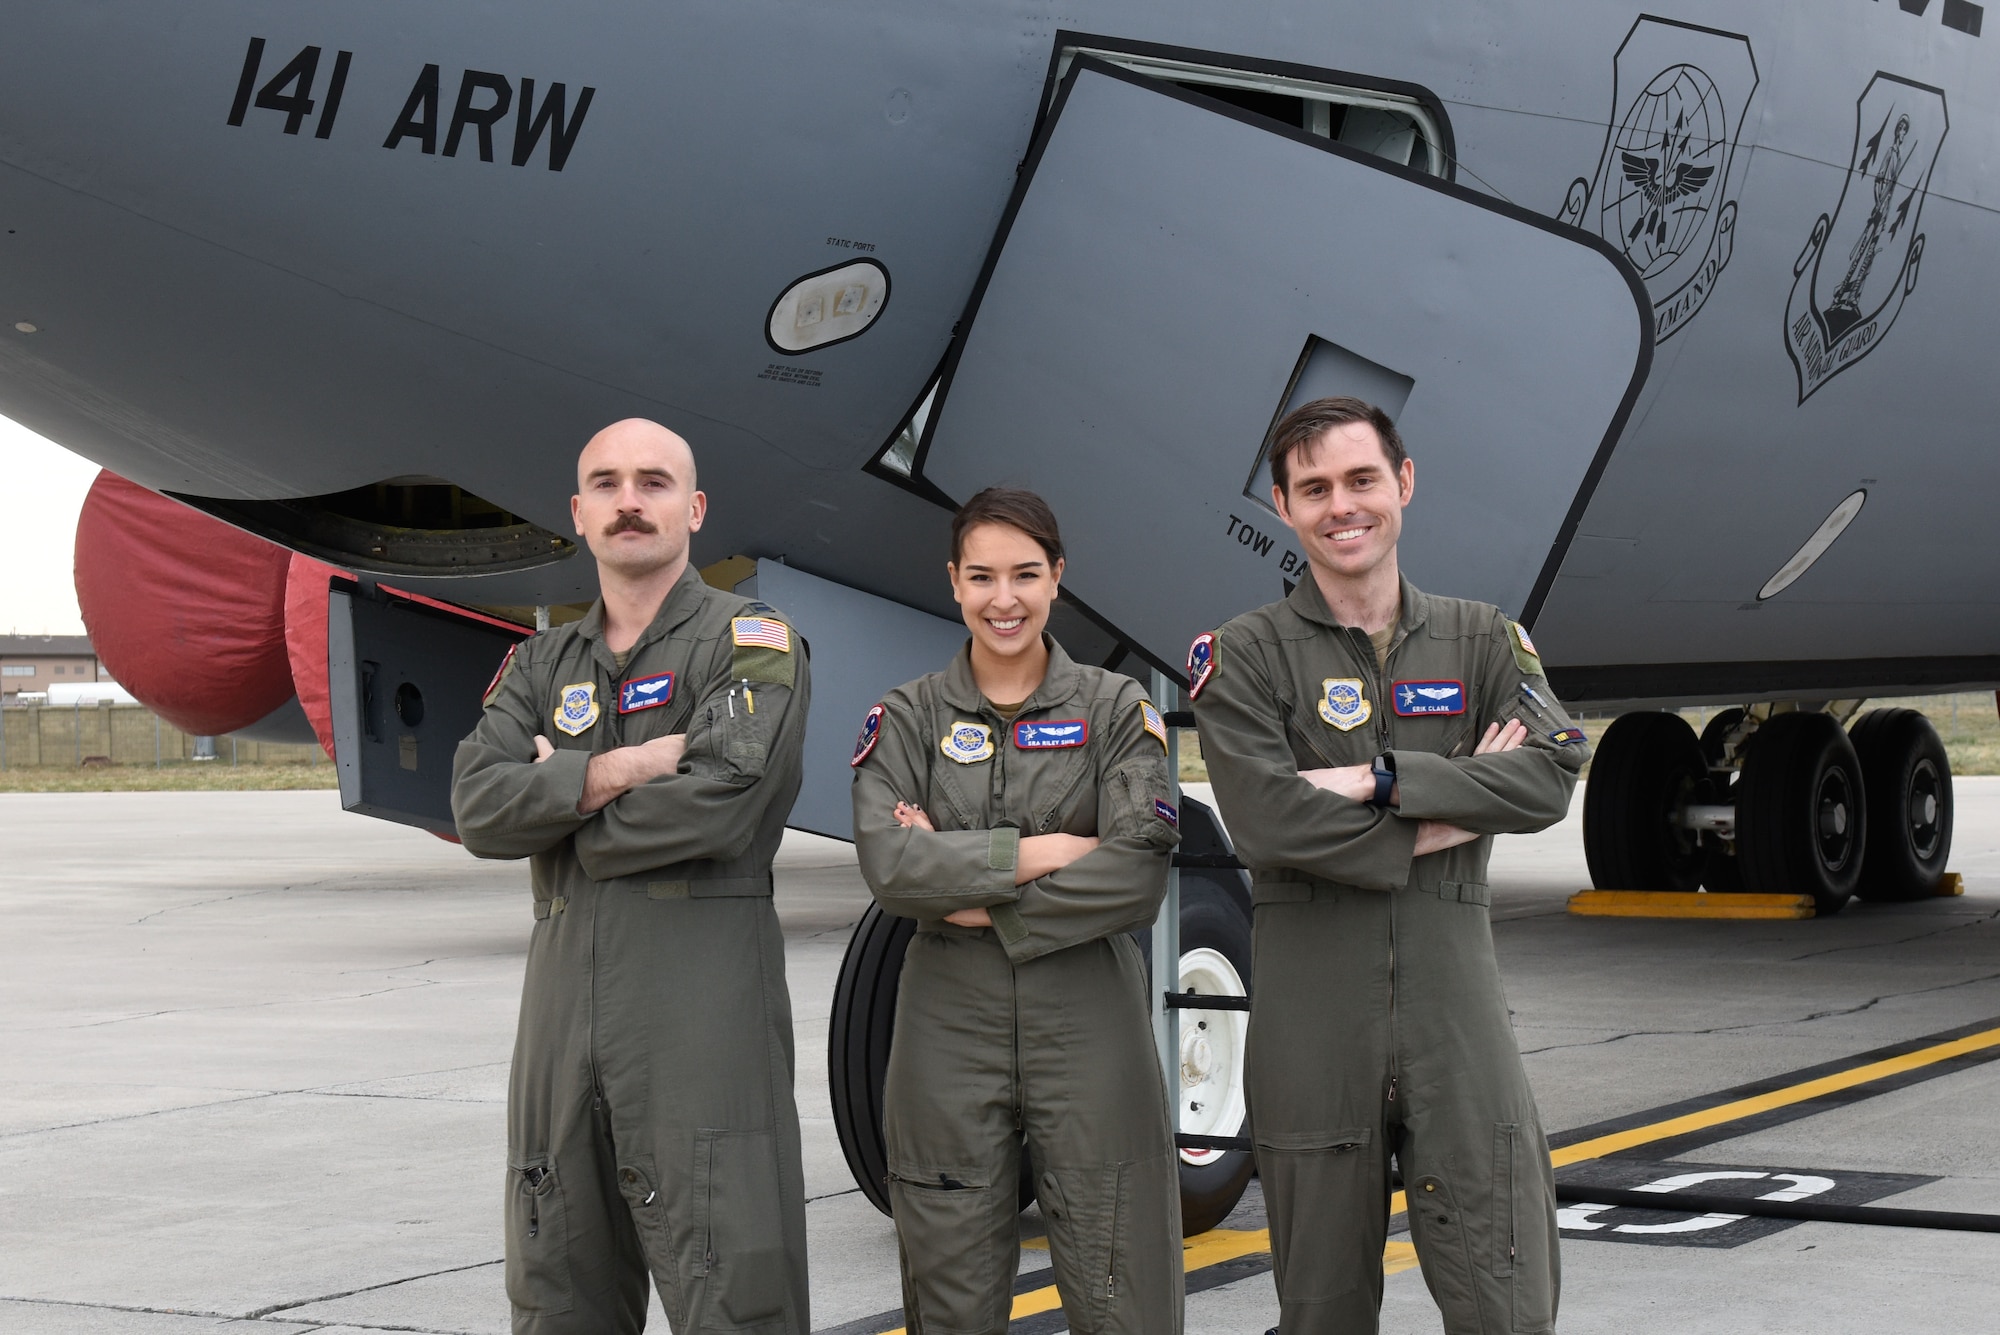 U.S. Air Force Capt. Erik Clark, 93rd Air Refueling Squadron KC-135 Stratotanker instructor pilot, Capt. Brady Miner, 93rd ARS KC-135 co-pilot, and Senior Airmen Riley Shin, 93rd ARS boom operator pose in front of a KC-135 at Fairchild Air Force Base, Washington, Dec. 2, 2021. Their crew received the task to evacuate nearly 20 refugees at a location only their aircraft could land during Operation Allies Refuge. (U.S. Air Force photo by Airman Jenna A. Bond)